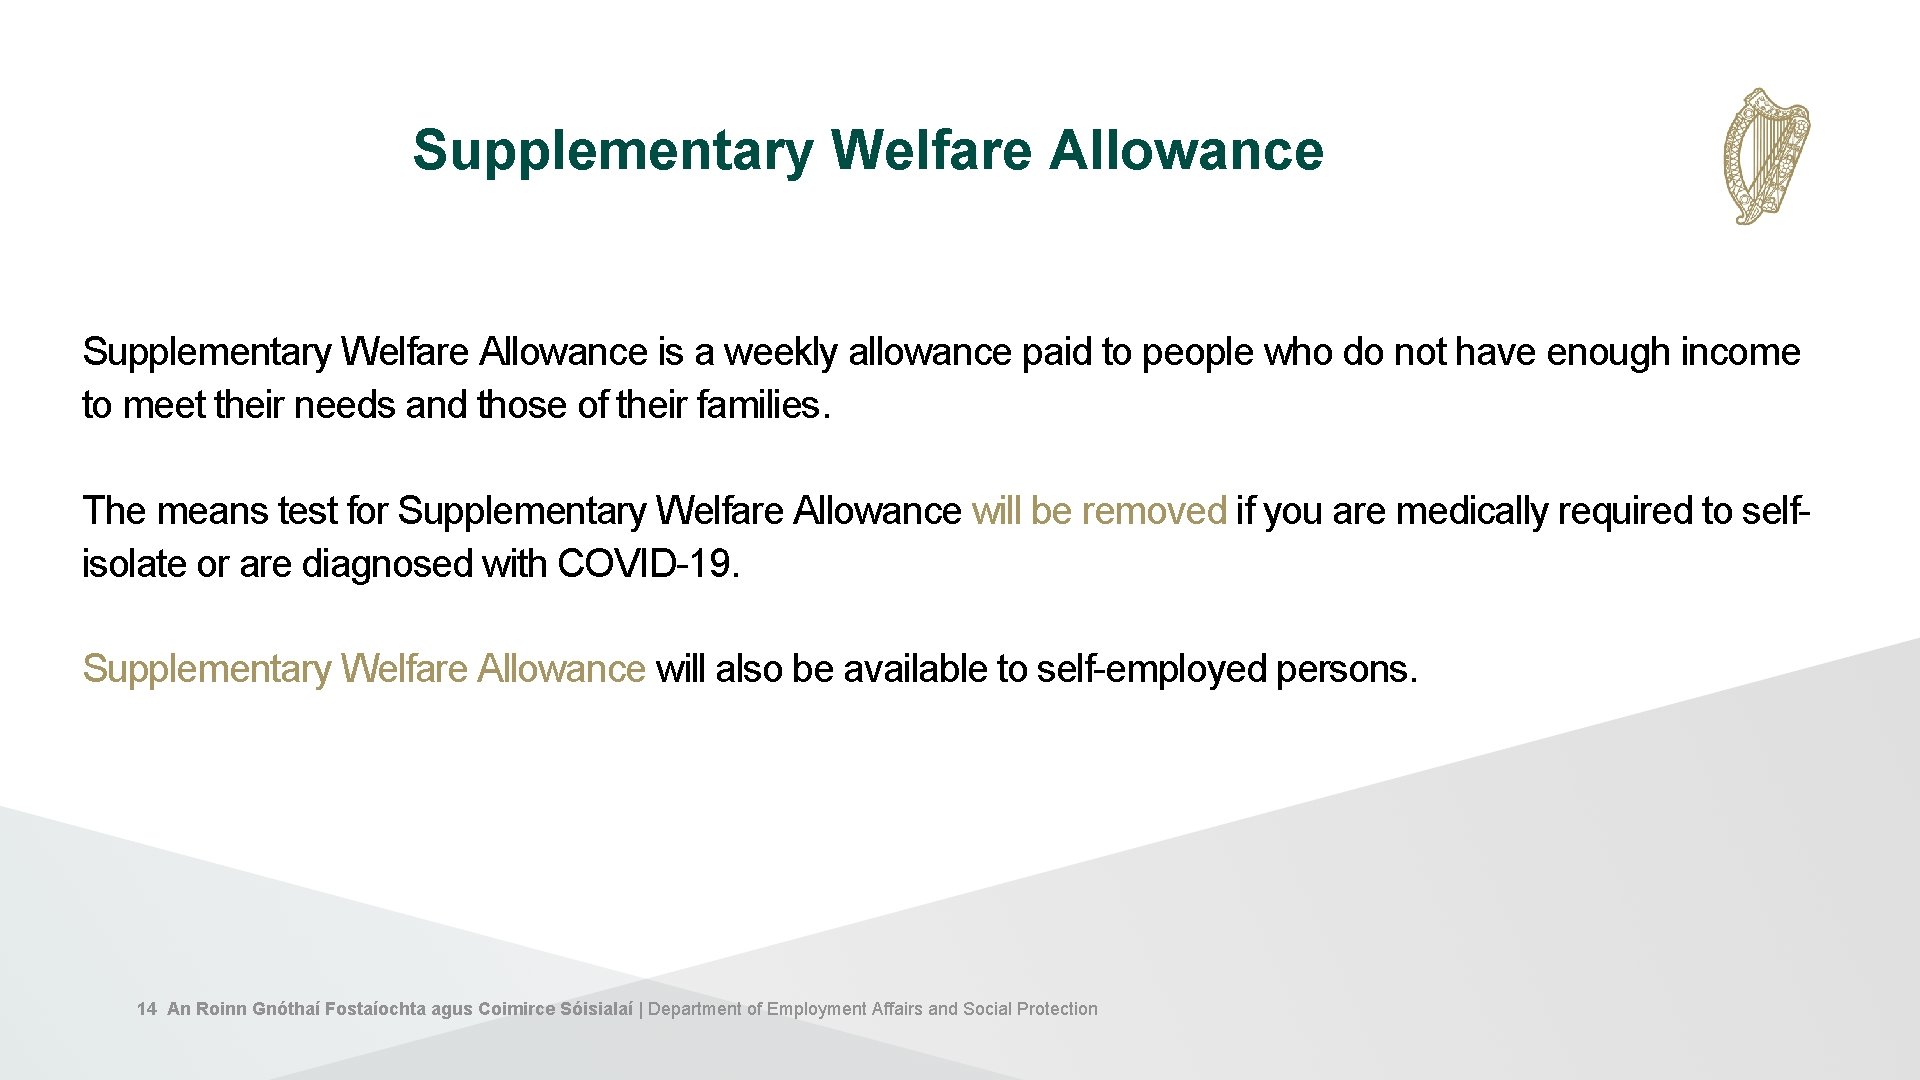 Supplementary Welfare Allowance is a weekly allowance paid to people who do not have